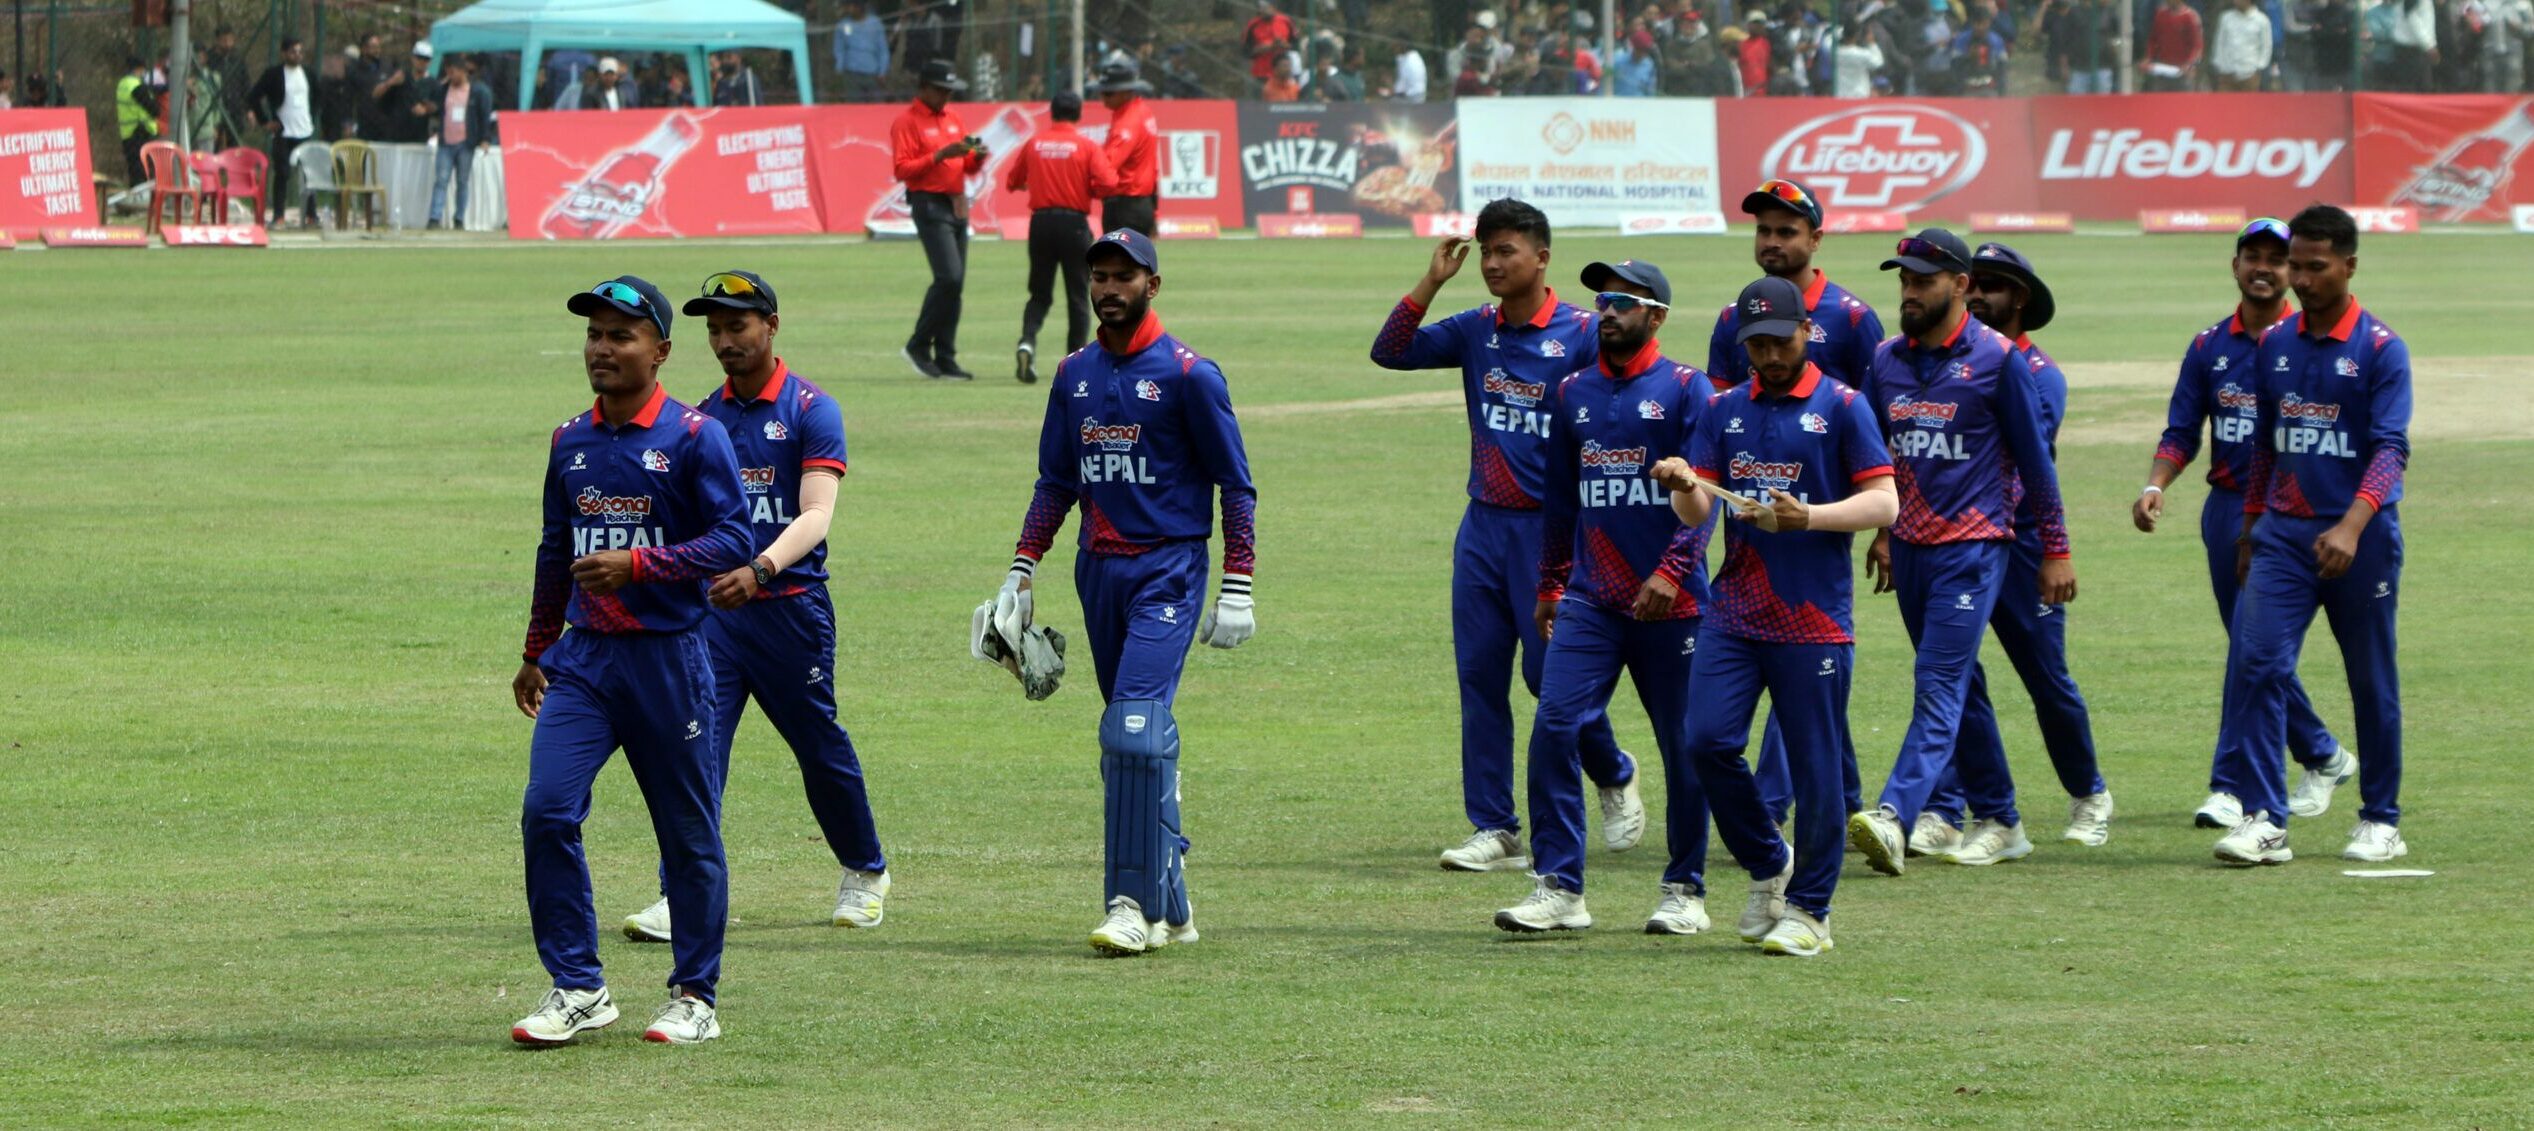 Nepal registers an improbable win to book a place for World Cup qualifiers